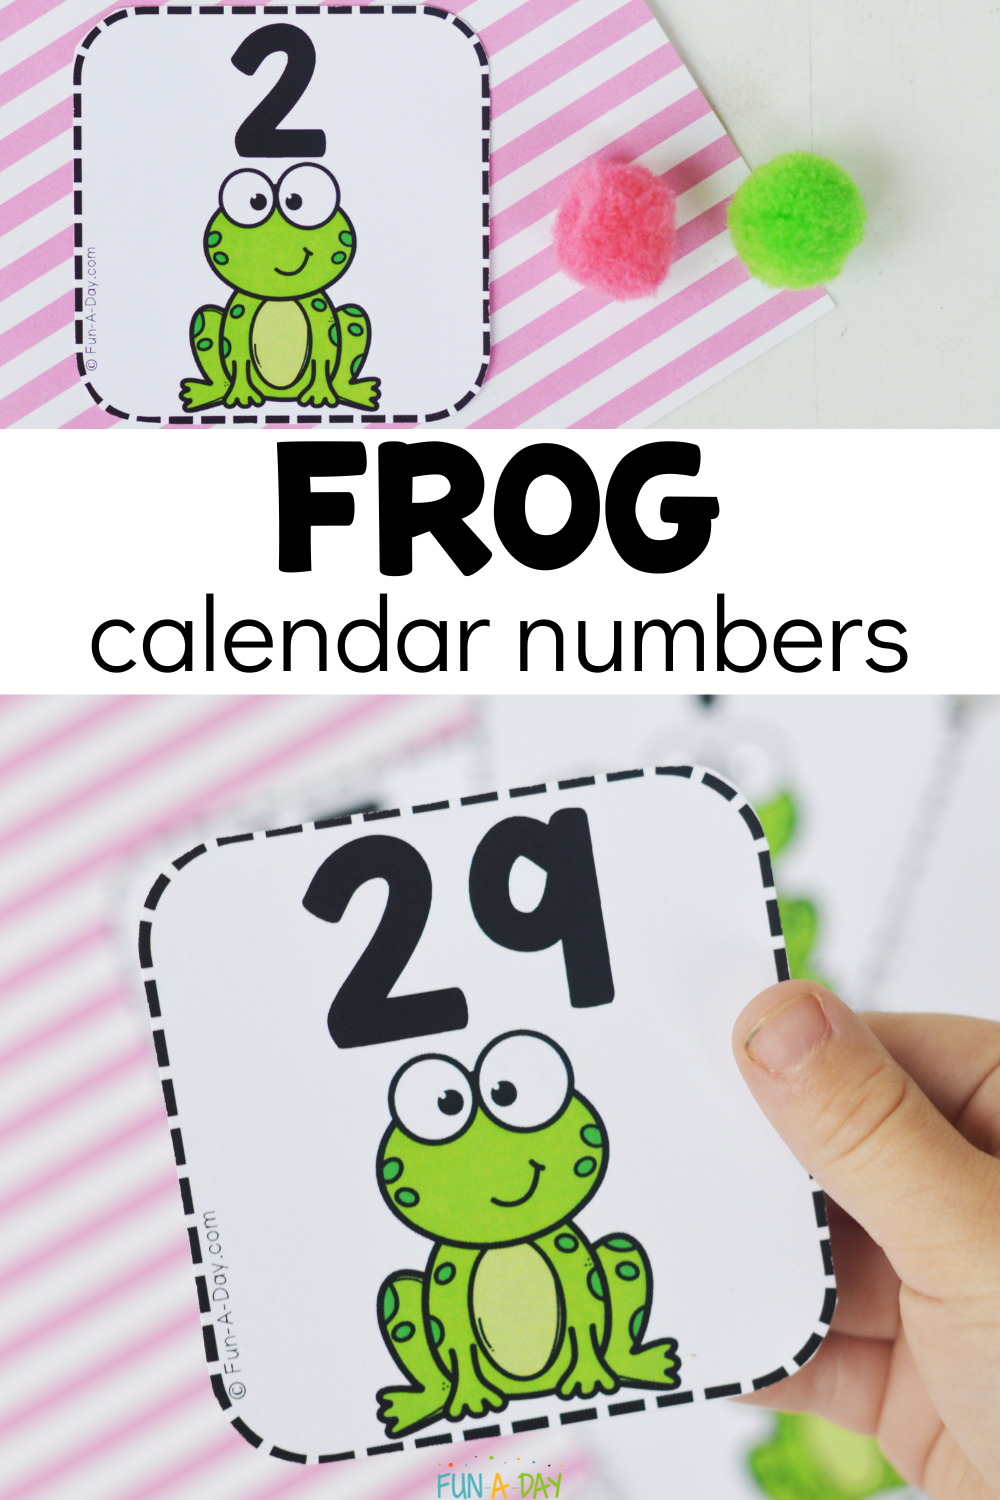 preschooler using number printables, with text that reads frog calendar numbers